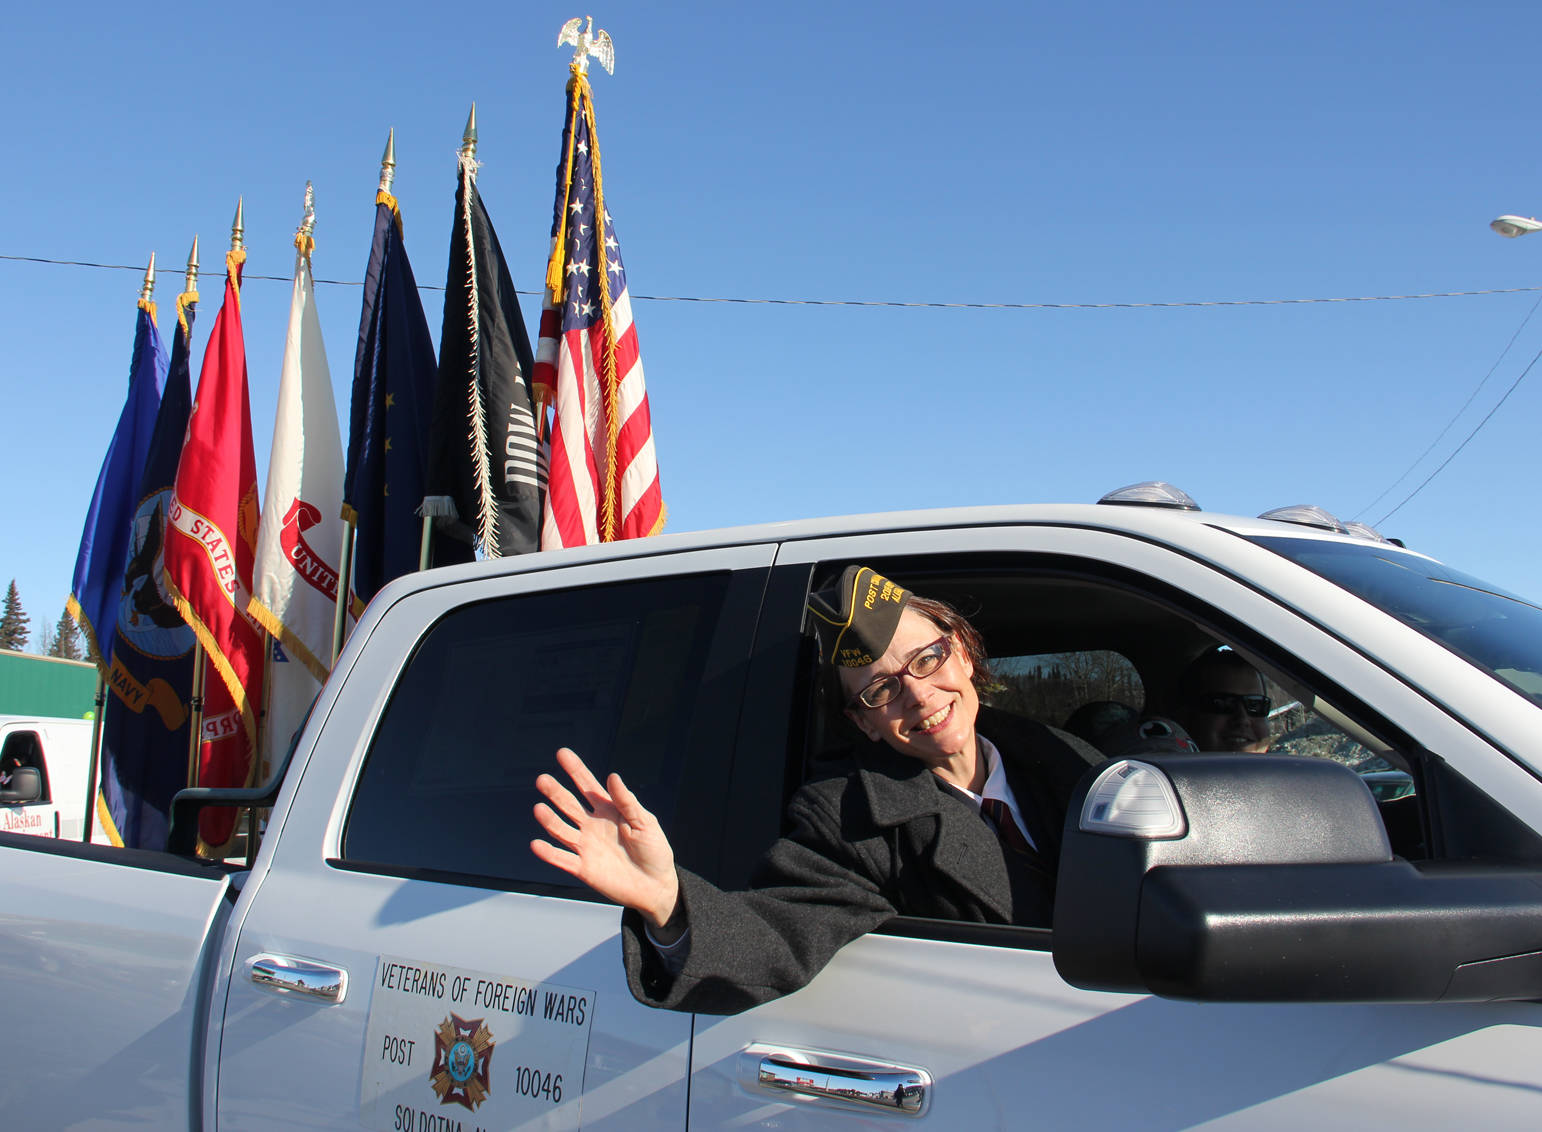 VFW Post 10046 commander Anne Toutant waves as Vets parade the Colors.